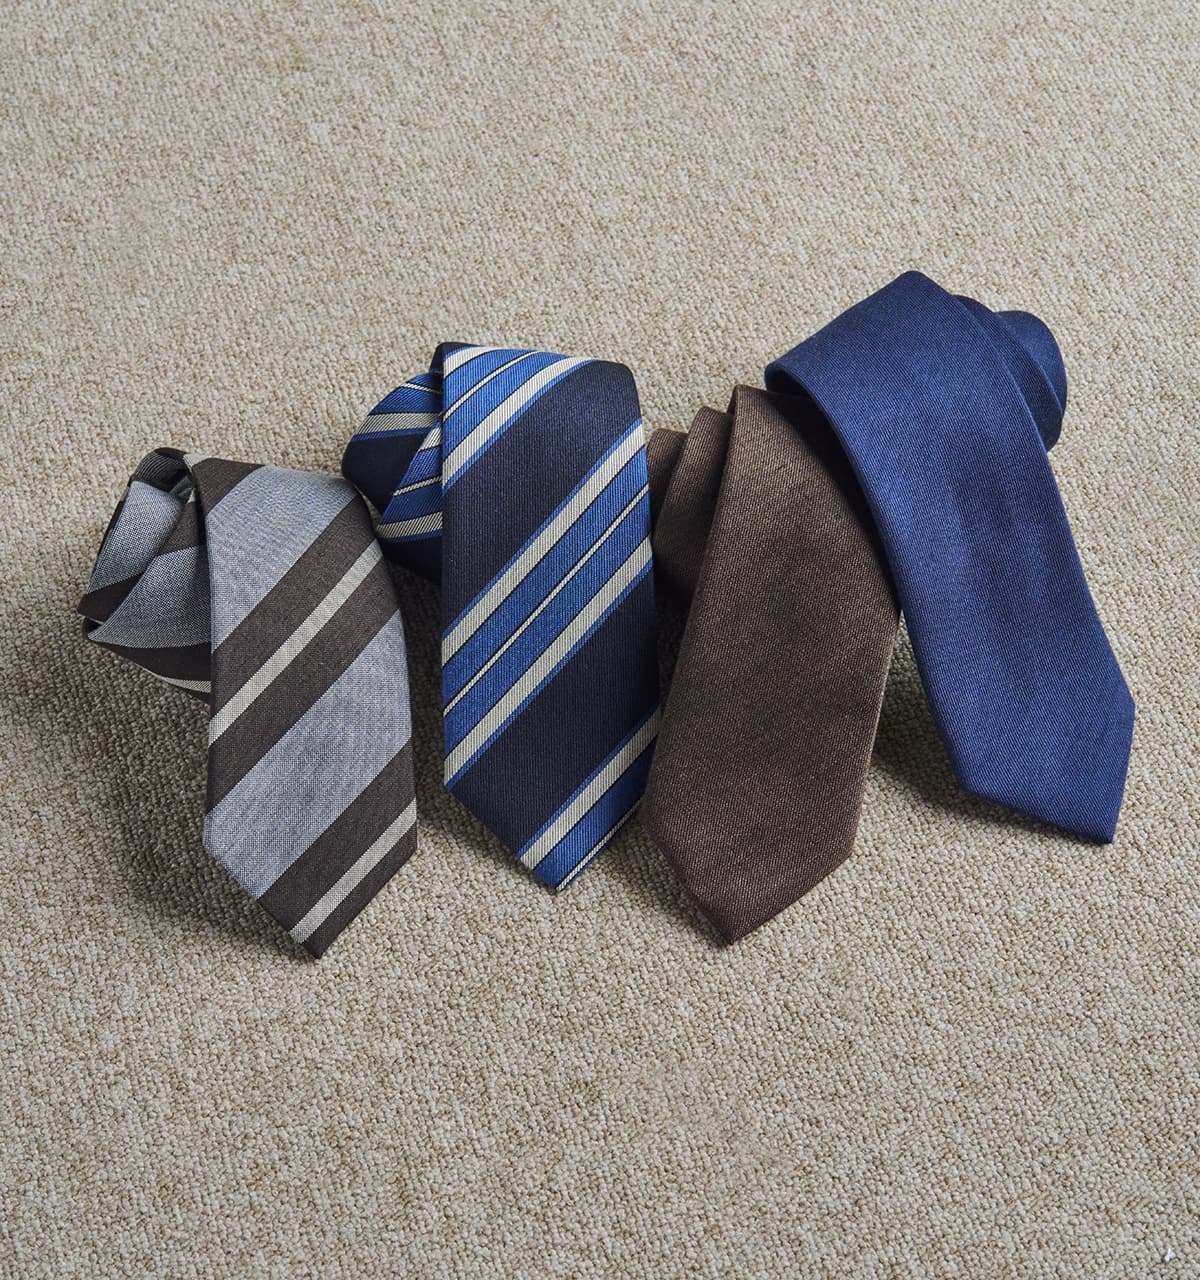 TIE COLLECTIONS